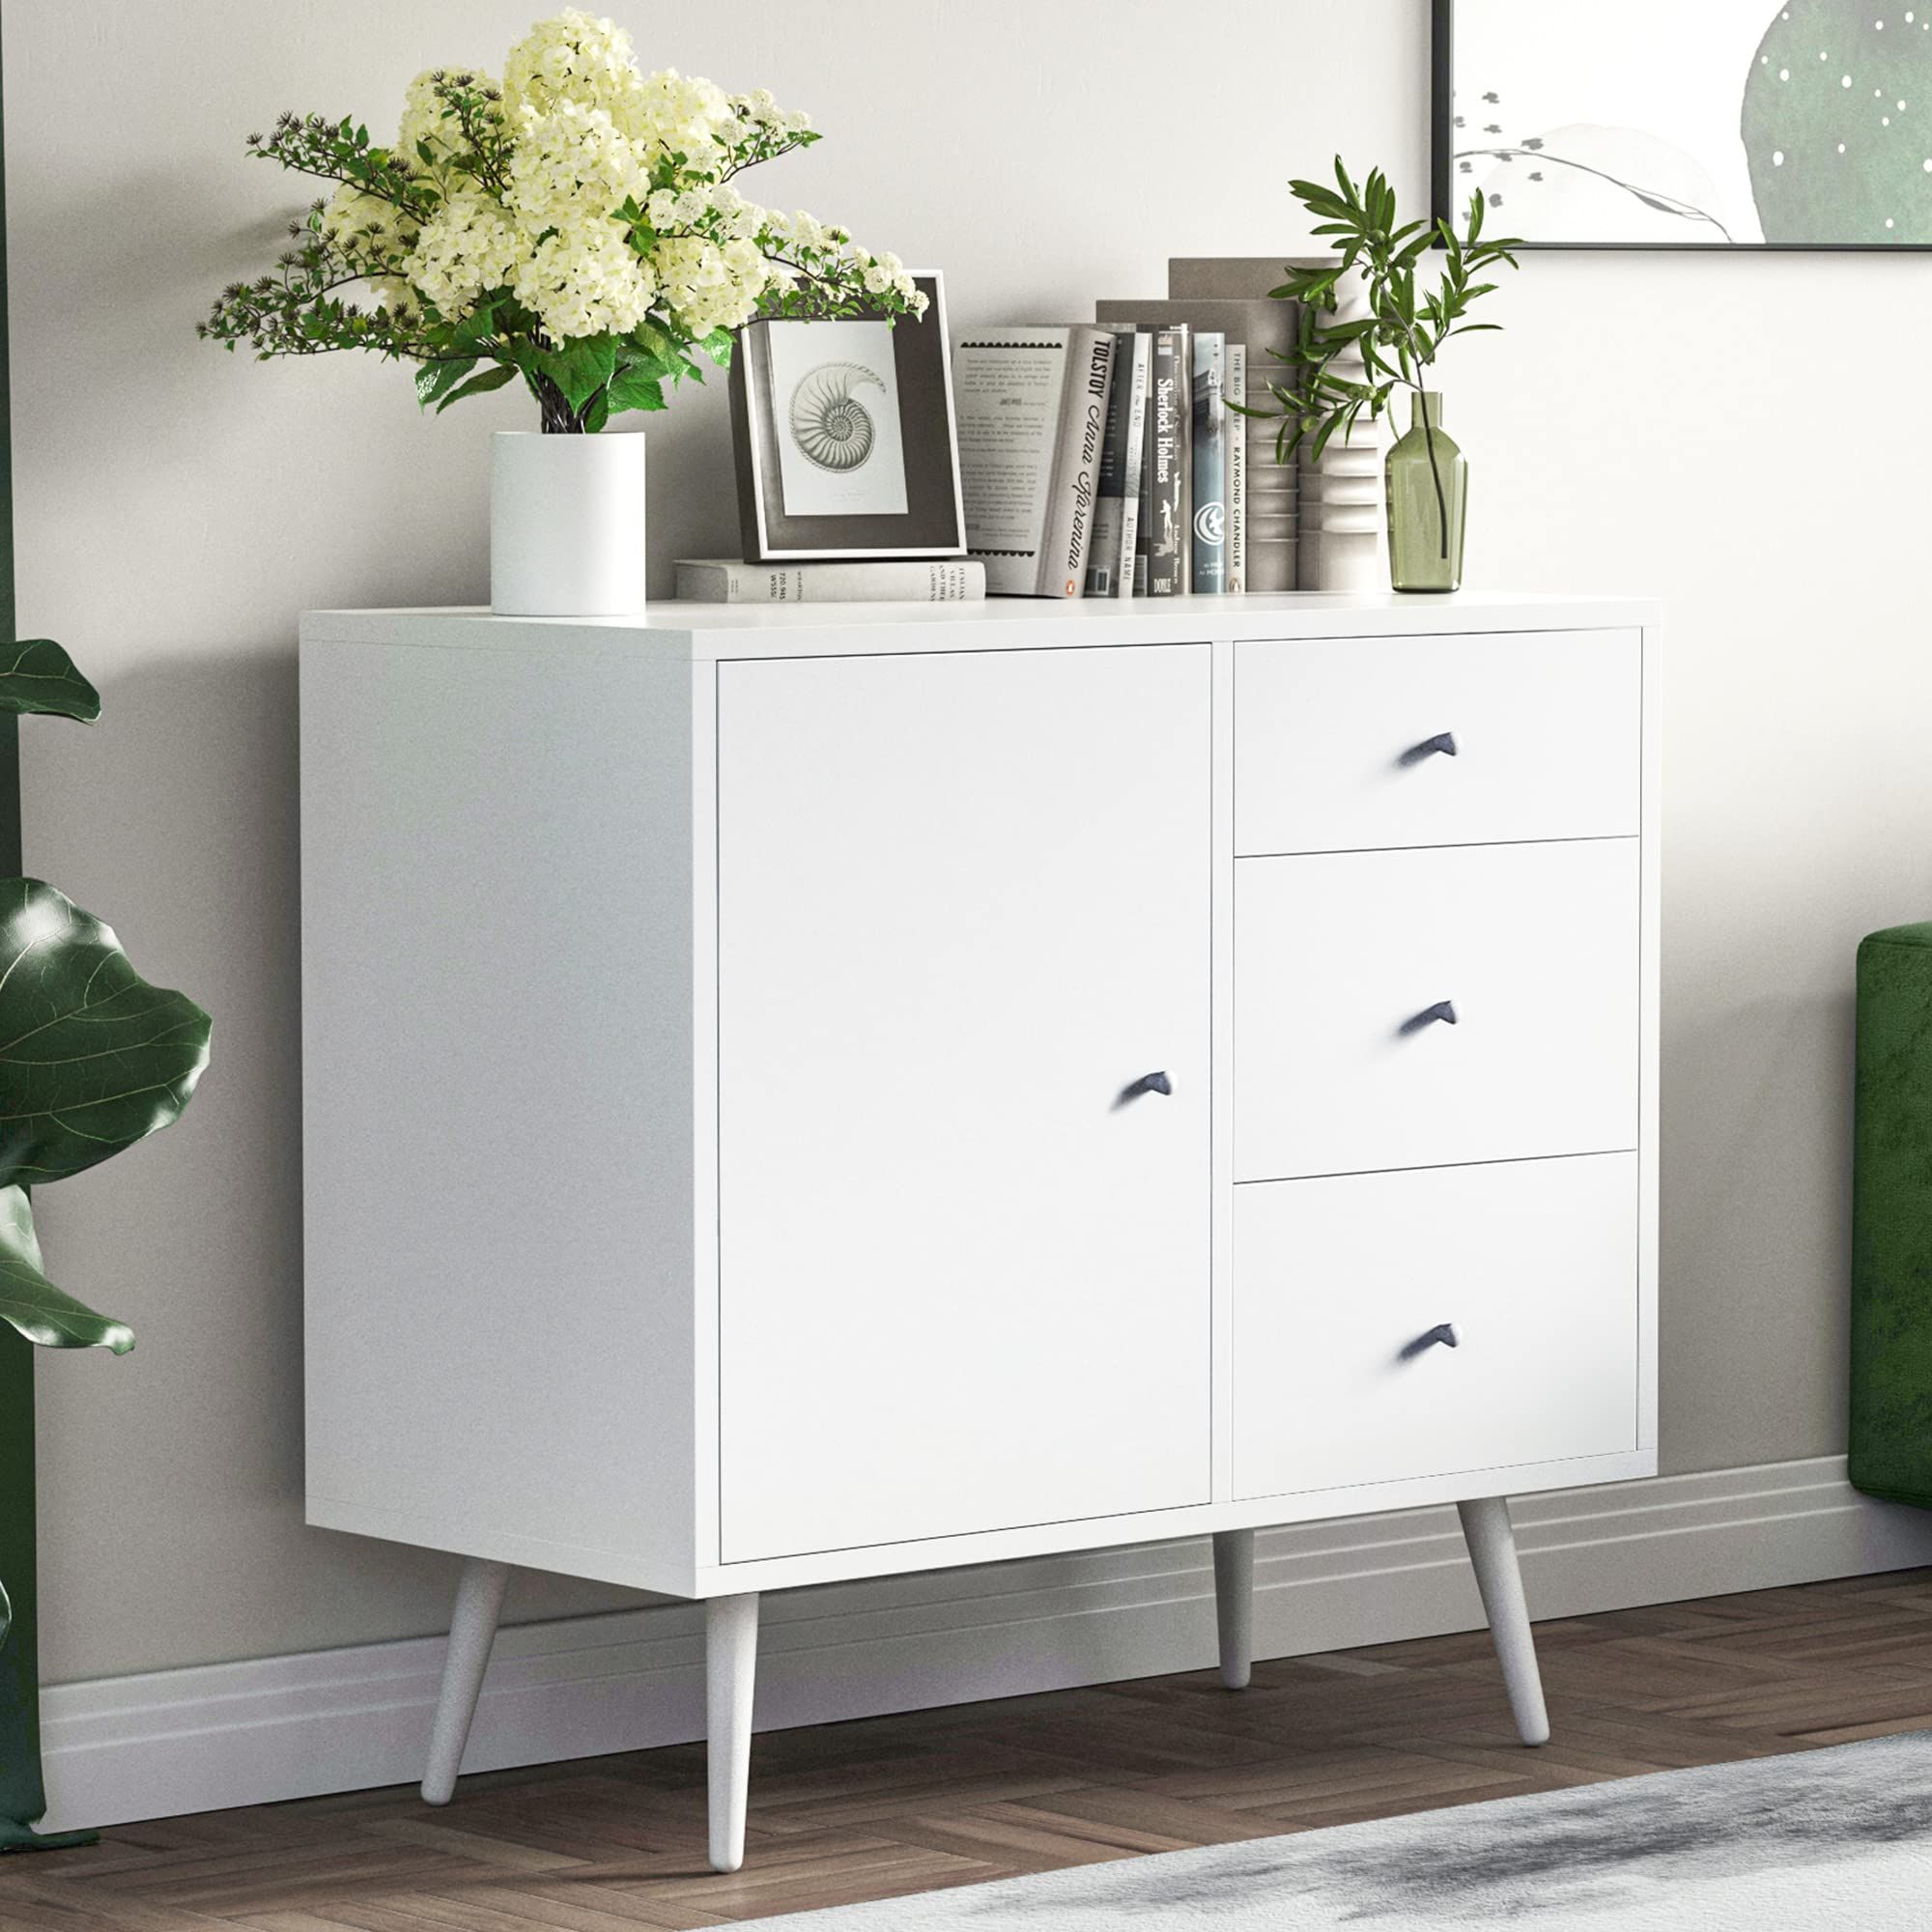 Amazon: Cozy Castle Wood Sideboard, Accent Buffet Storage Cabinet With 3  Drawers, Free Standing For Living Room Bedroom, Cupboard Console Table For  Home Kitchen Dining Room, 32 Inch, White : Home & Kitchen With Most Recent 3 Drawers Sideboards Storage Cabinet (View 4 of 10)